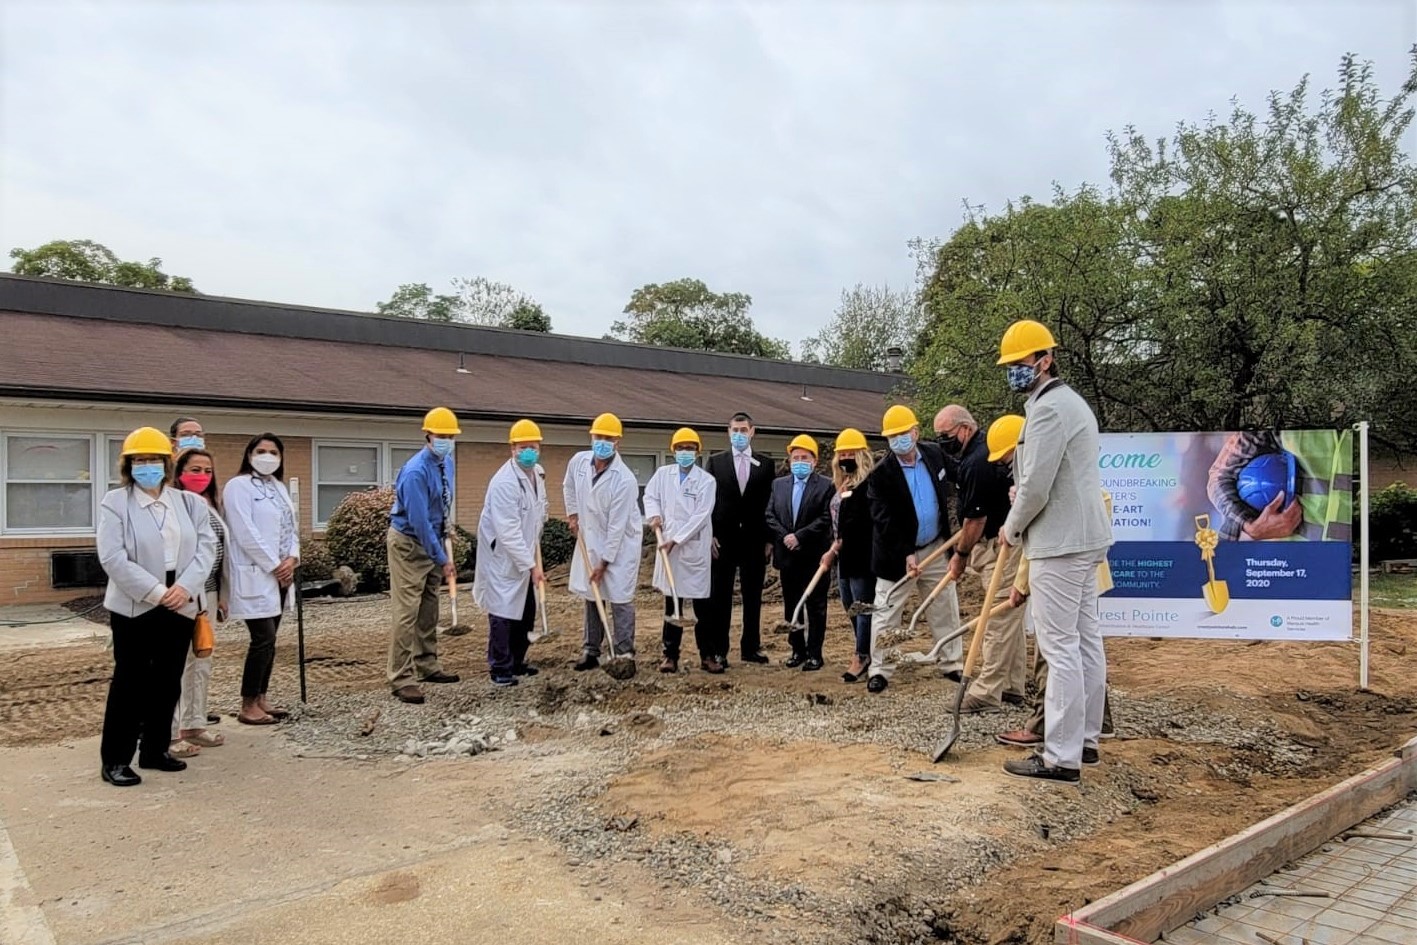 Crest Pointe Rehabilitation & Healthcare Center Celebrates Groundbreaking for 3,000-SF Building Expansion to House Therapy Gym